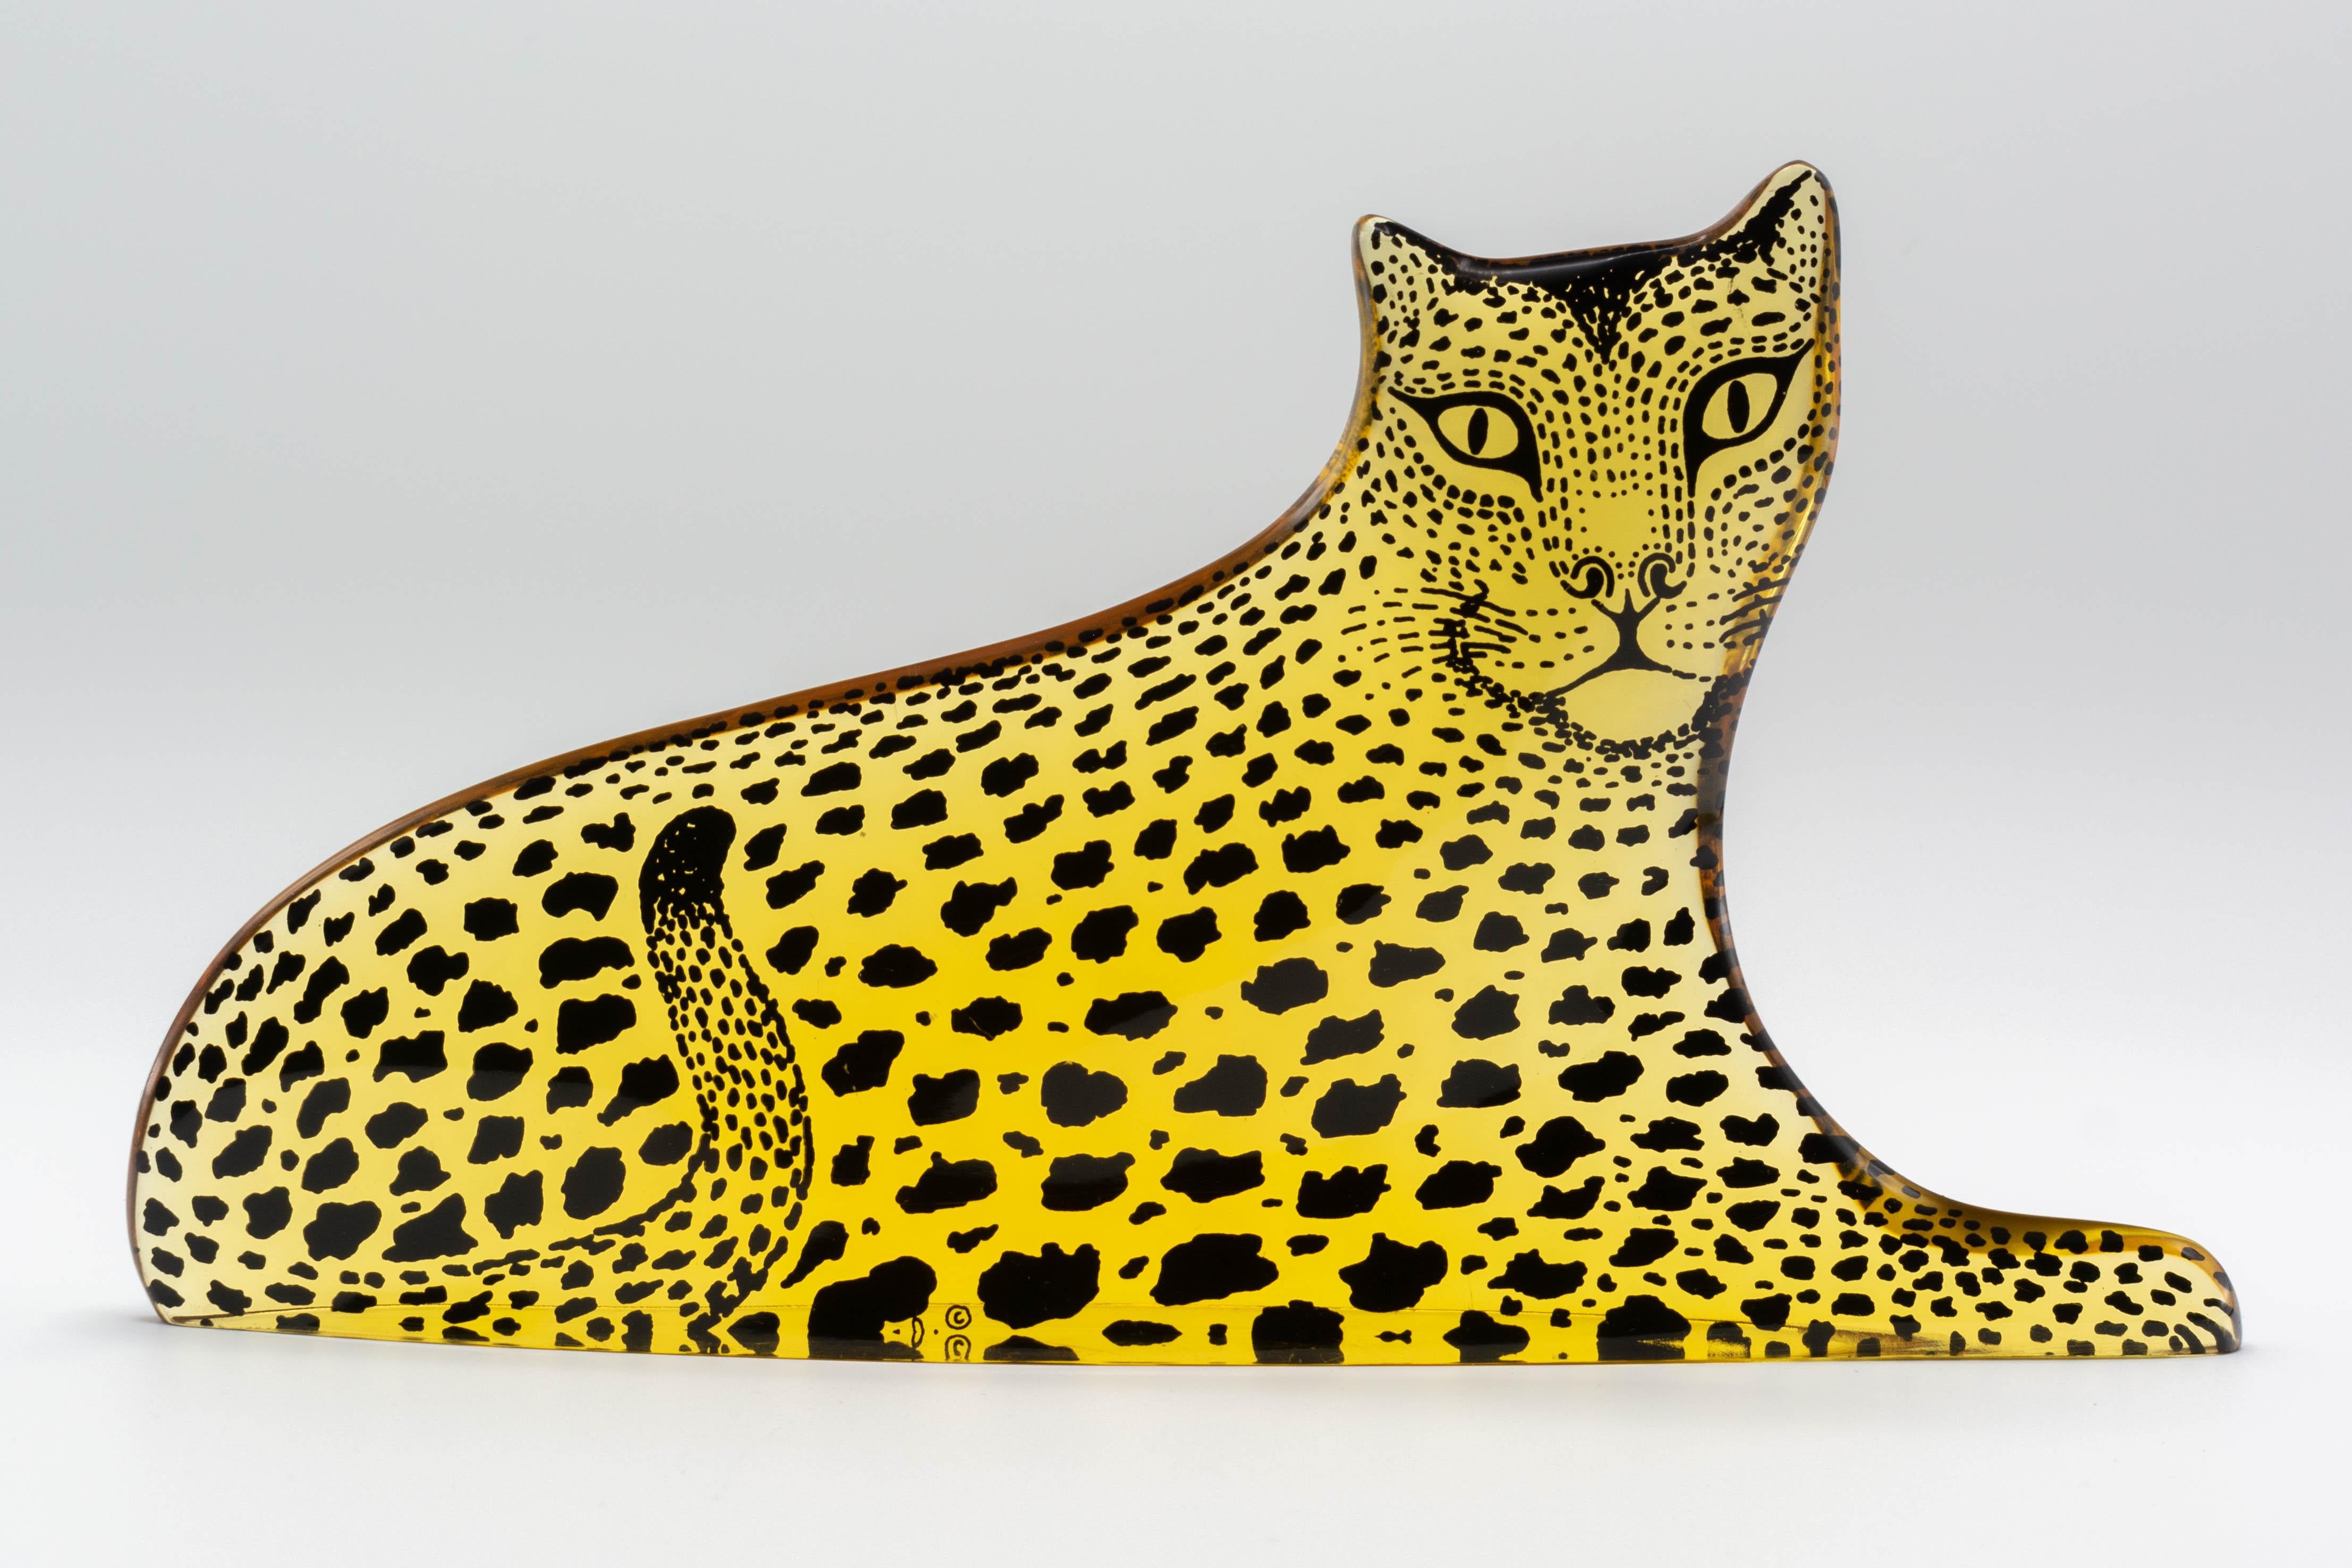 A Mid-Century Modern Lucite Op Art leopard designed by Abraham Palatnik. Original label on bottom: Made in Brasil. Abraham Palatnik (born in 1928) is a Brazilian artist and inventor whose innovations include kinechromatic art. Part of the Artemis